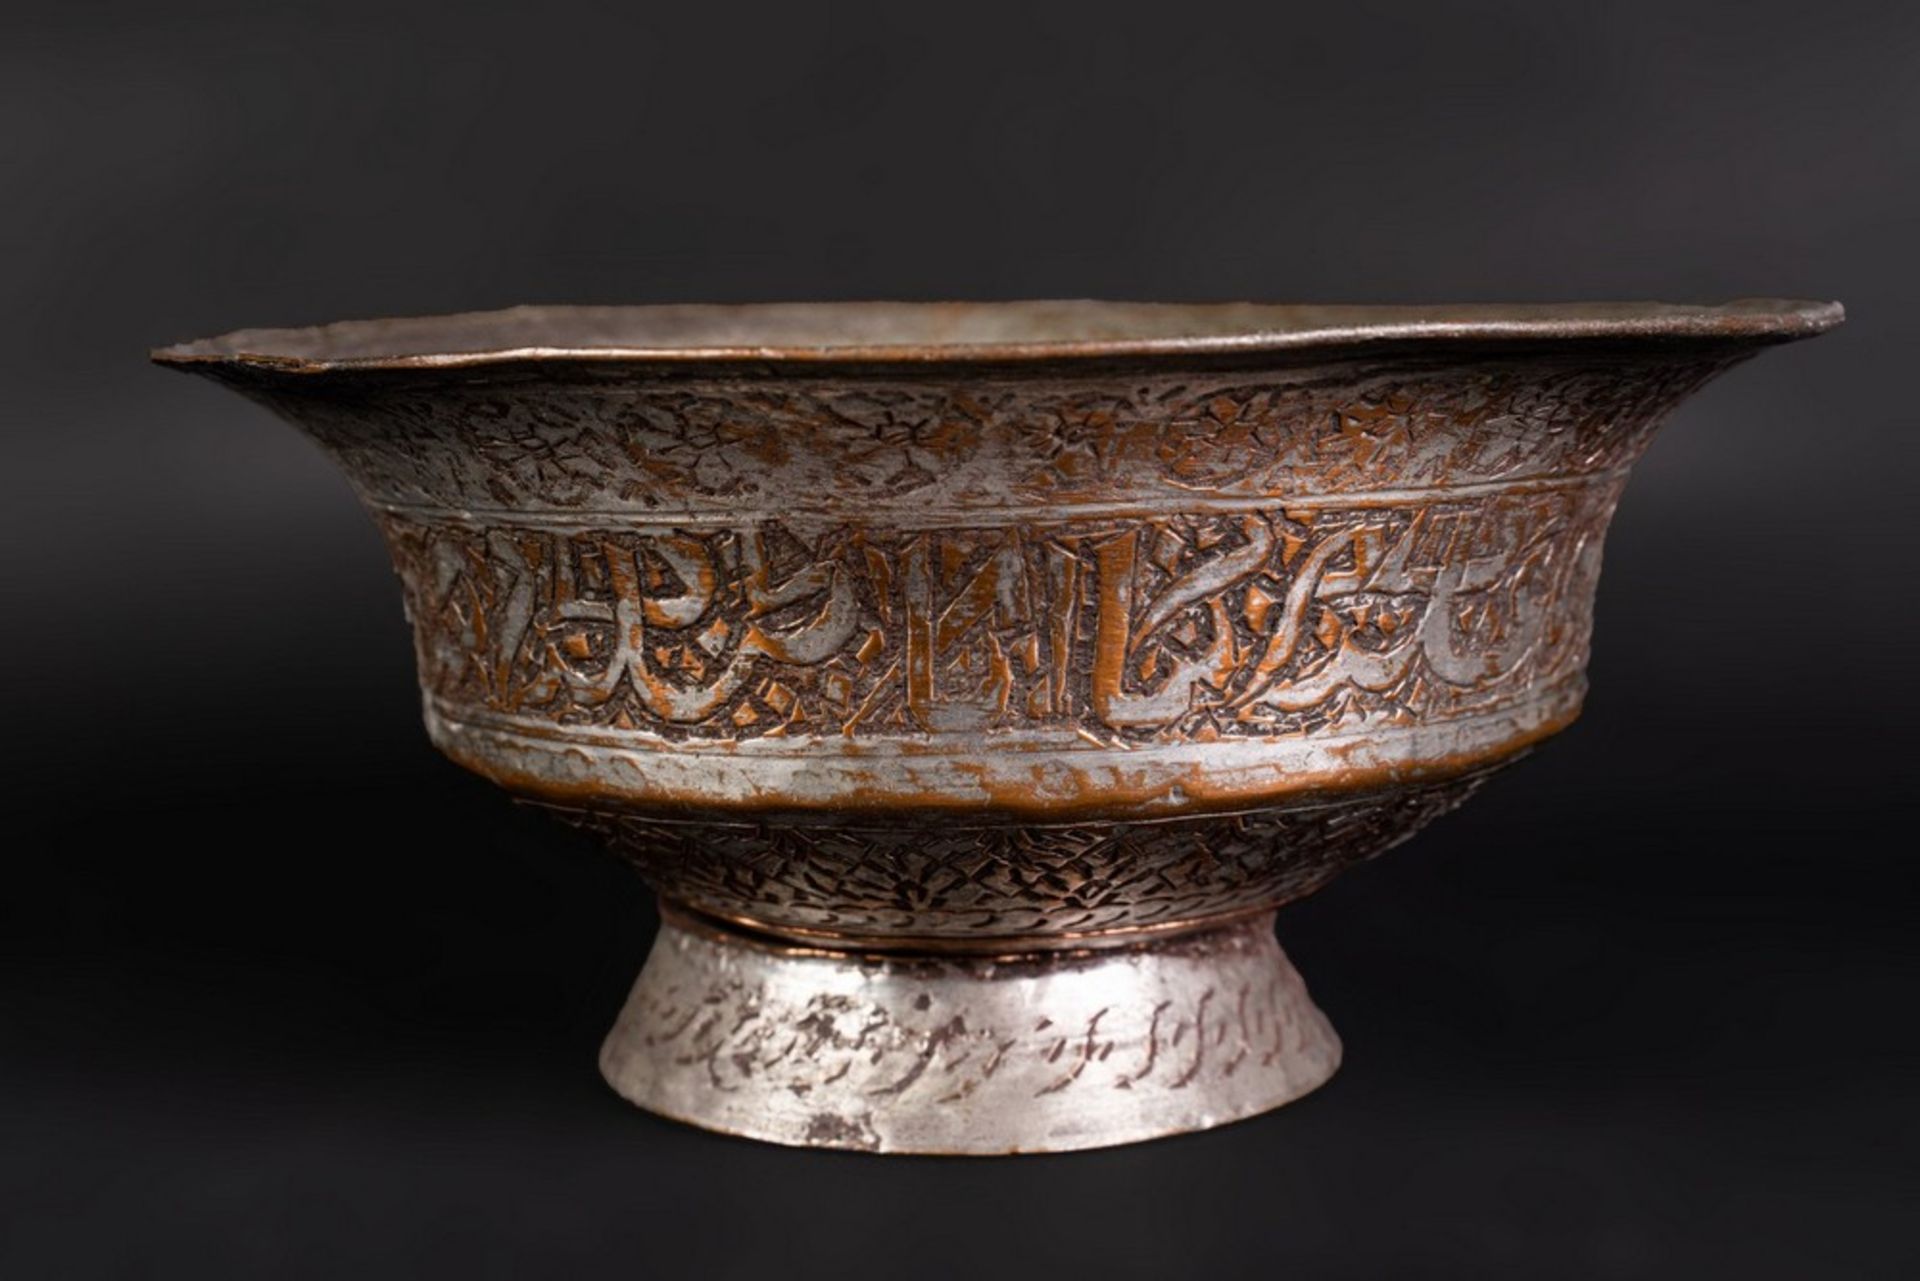 Arte Islamica An embossed tinned copper bowl with inscriptions Folk Safavid Persia, 17th-18th centu - Image 2 of 3